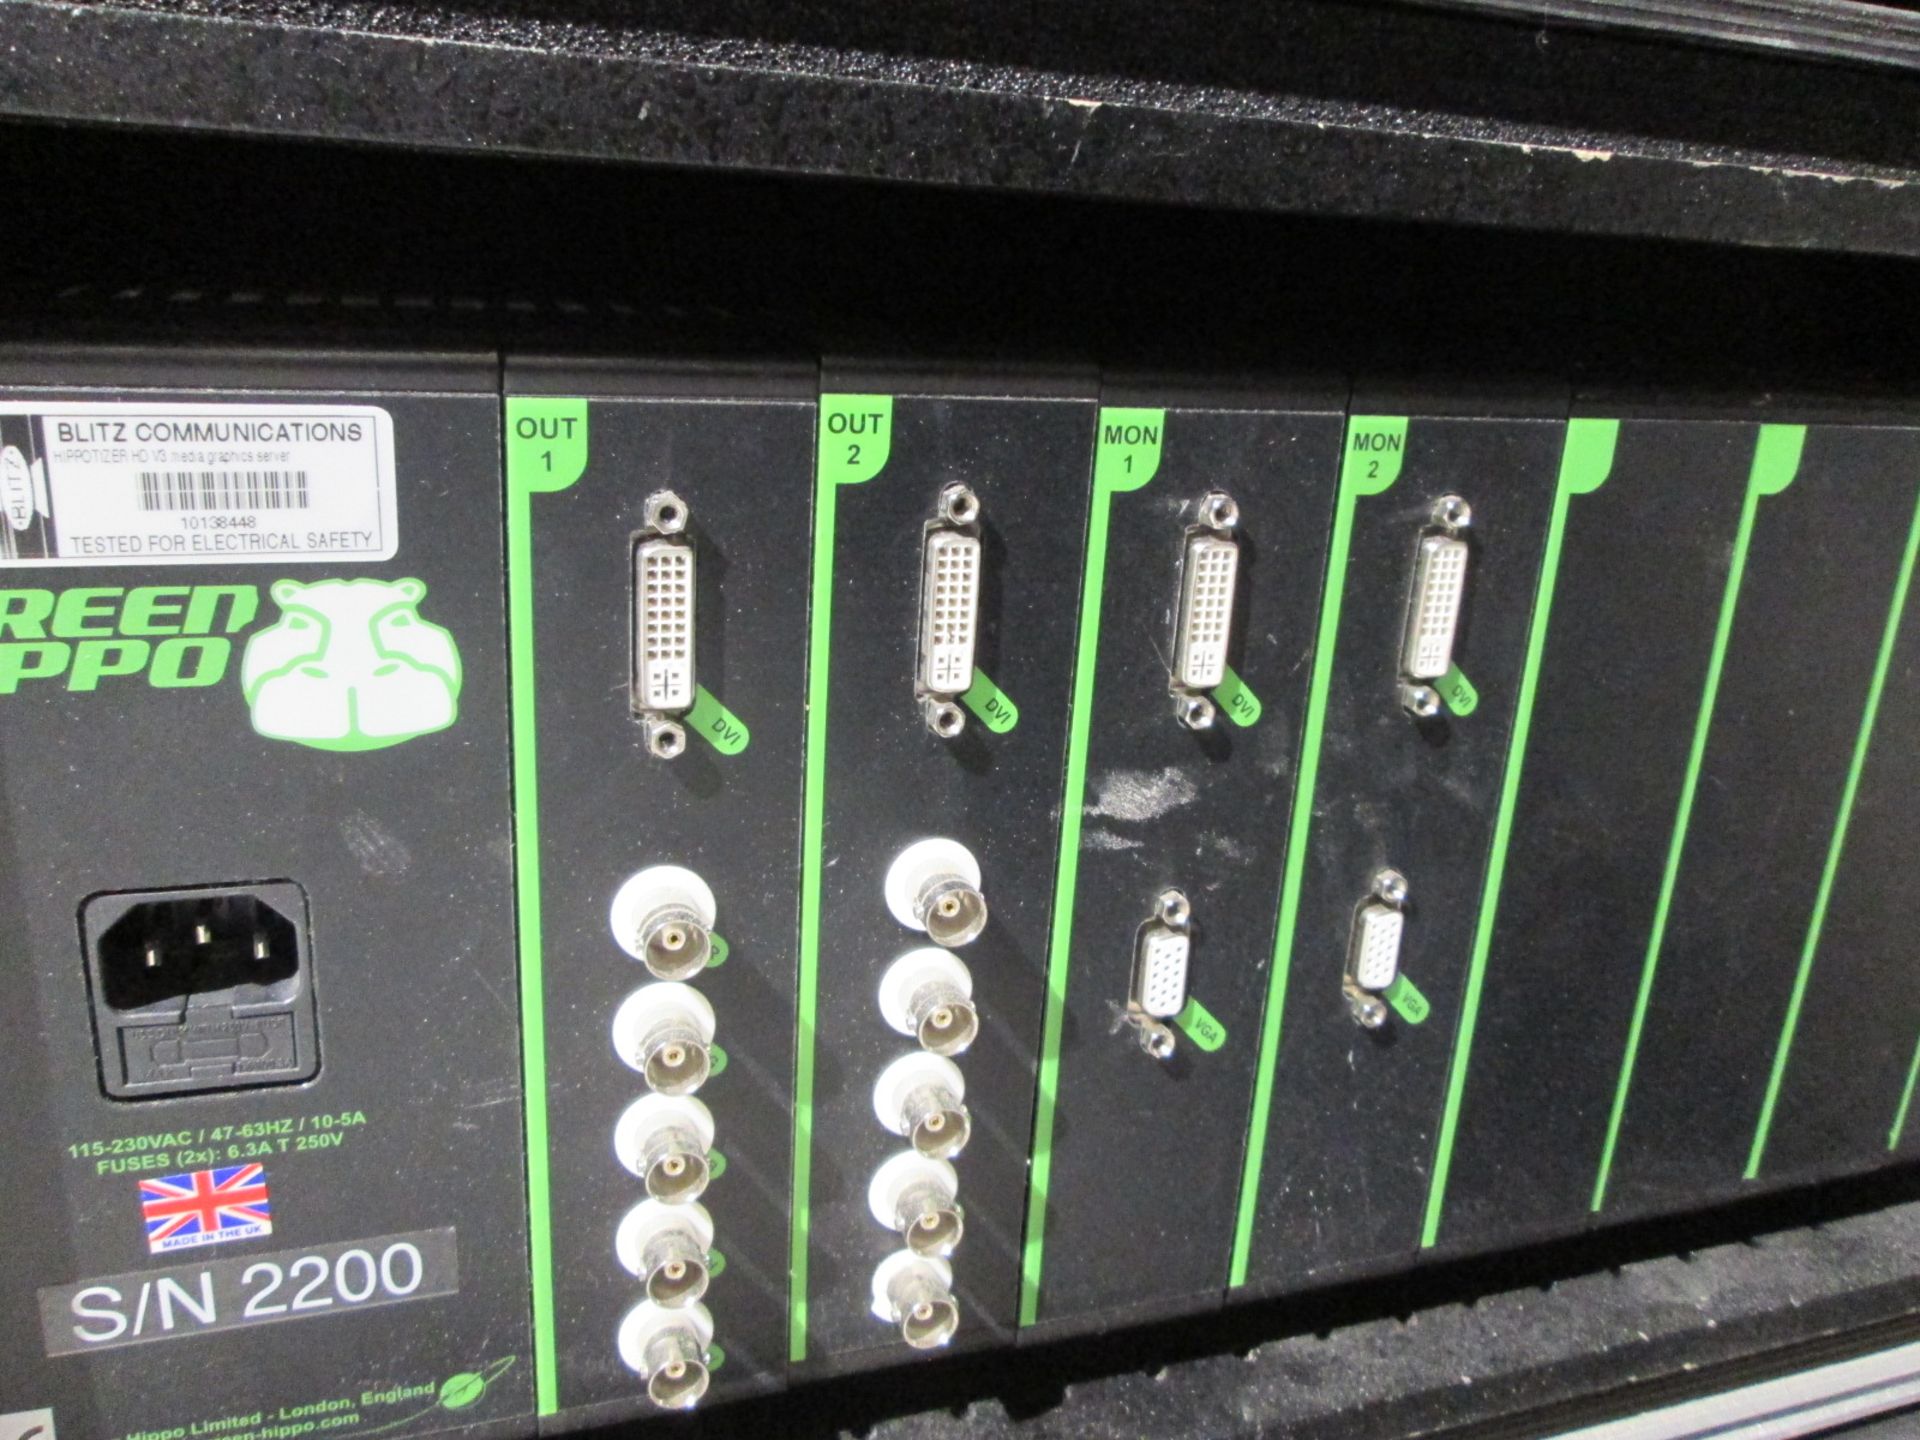 Green Hippo V5 Hippotiser Media Graphics Server with fader remote panel. S/N 2200. In flight case - Image 7 of 9